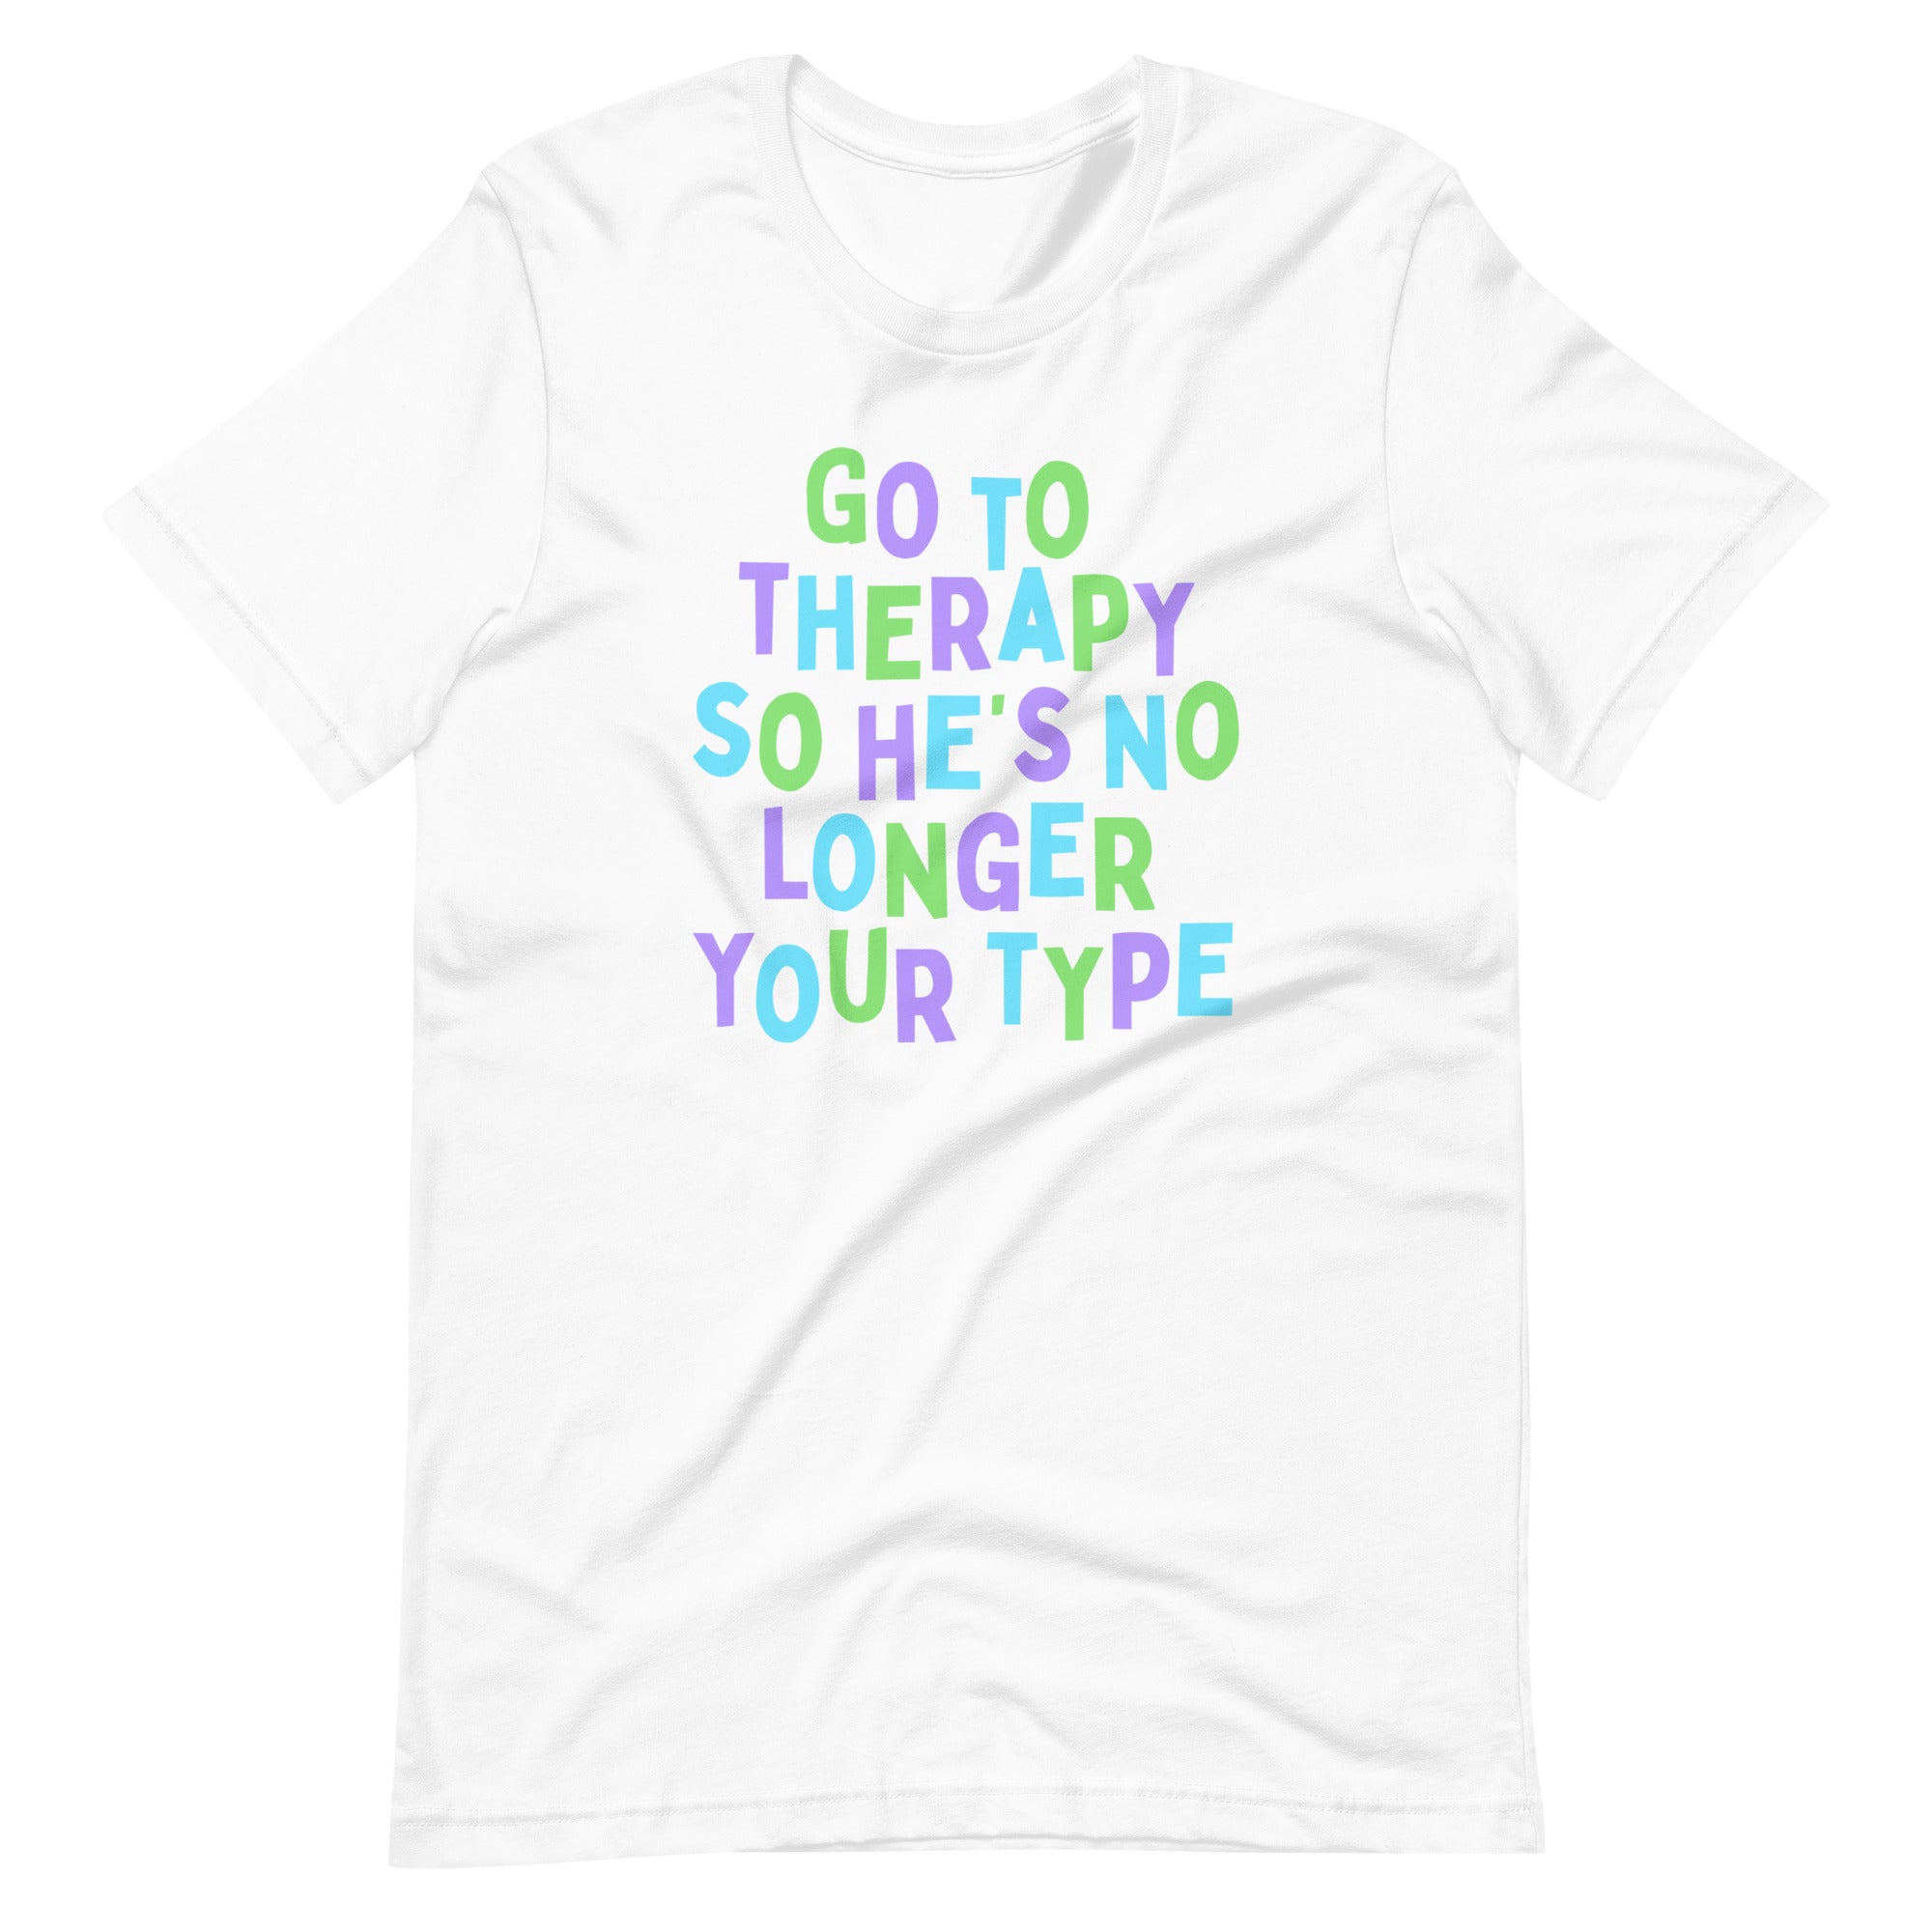 Go To Therapy So He’s No Longer Your Type Unisex Feminist t-shirt - Shop Women’s Rights T-shirts - Feminist Trash Store - White